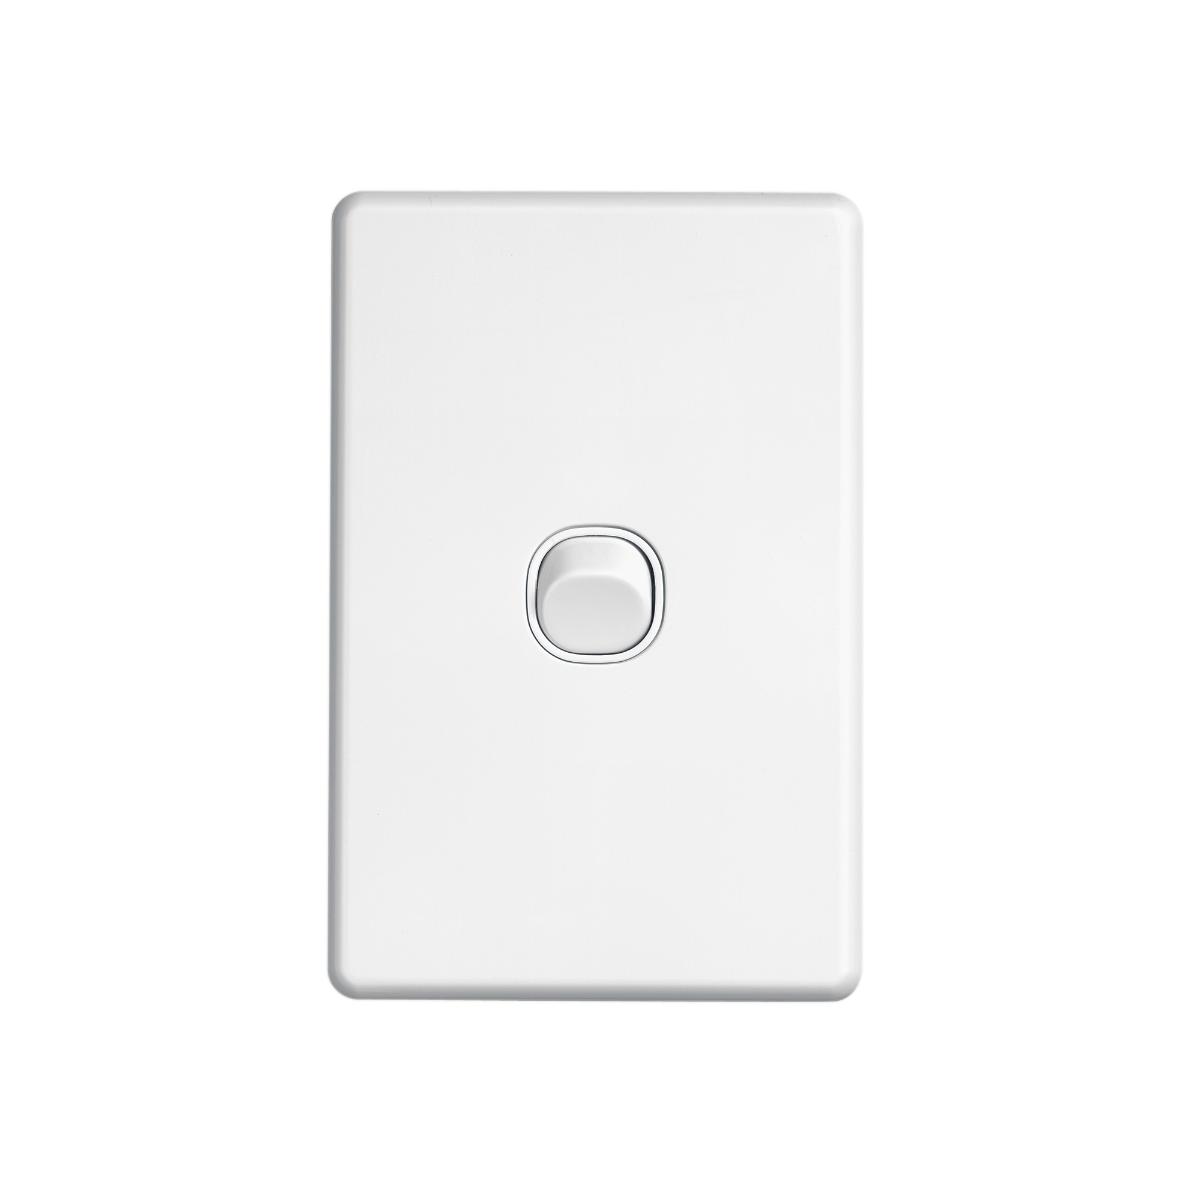 C2000 SWITCH VERTICAL 1G 10A WHITE